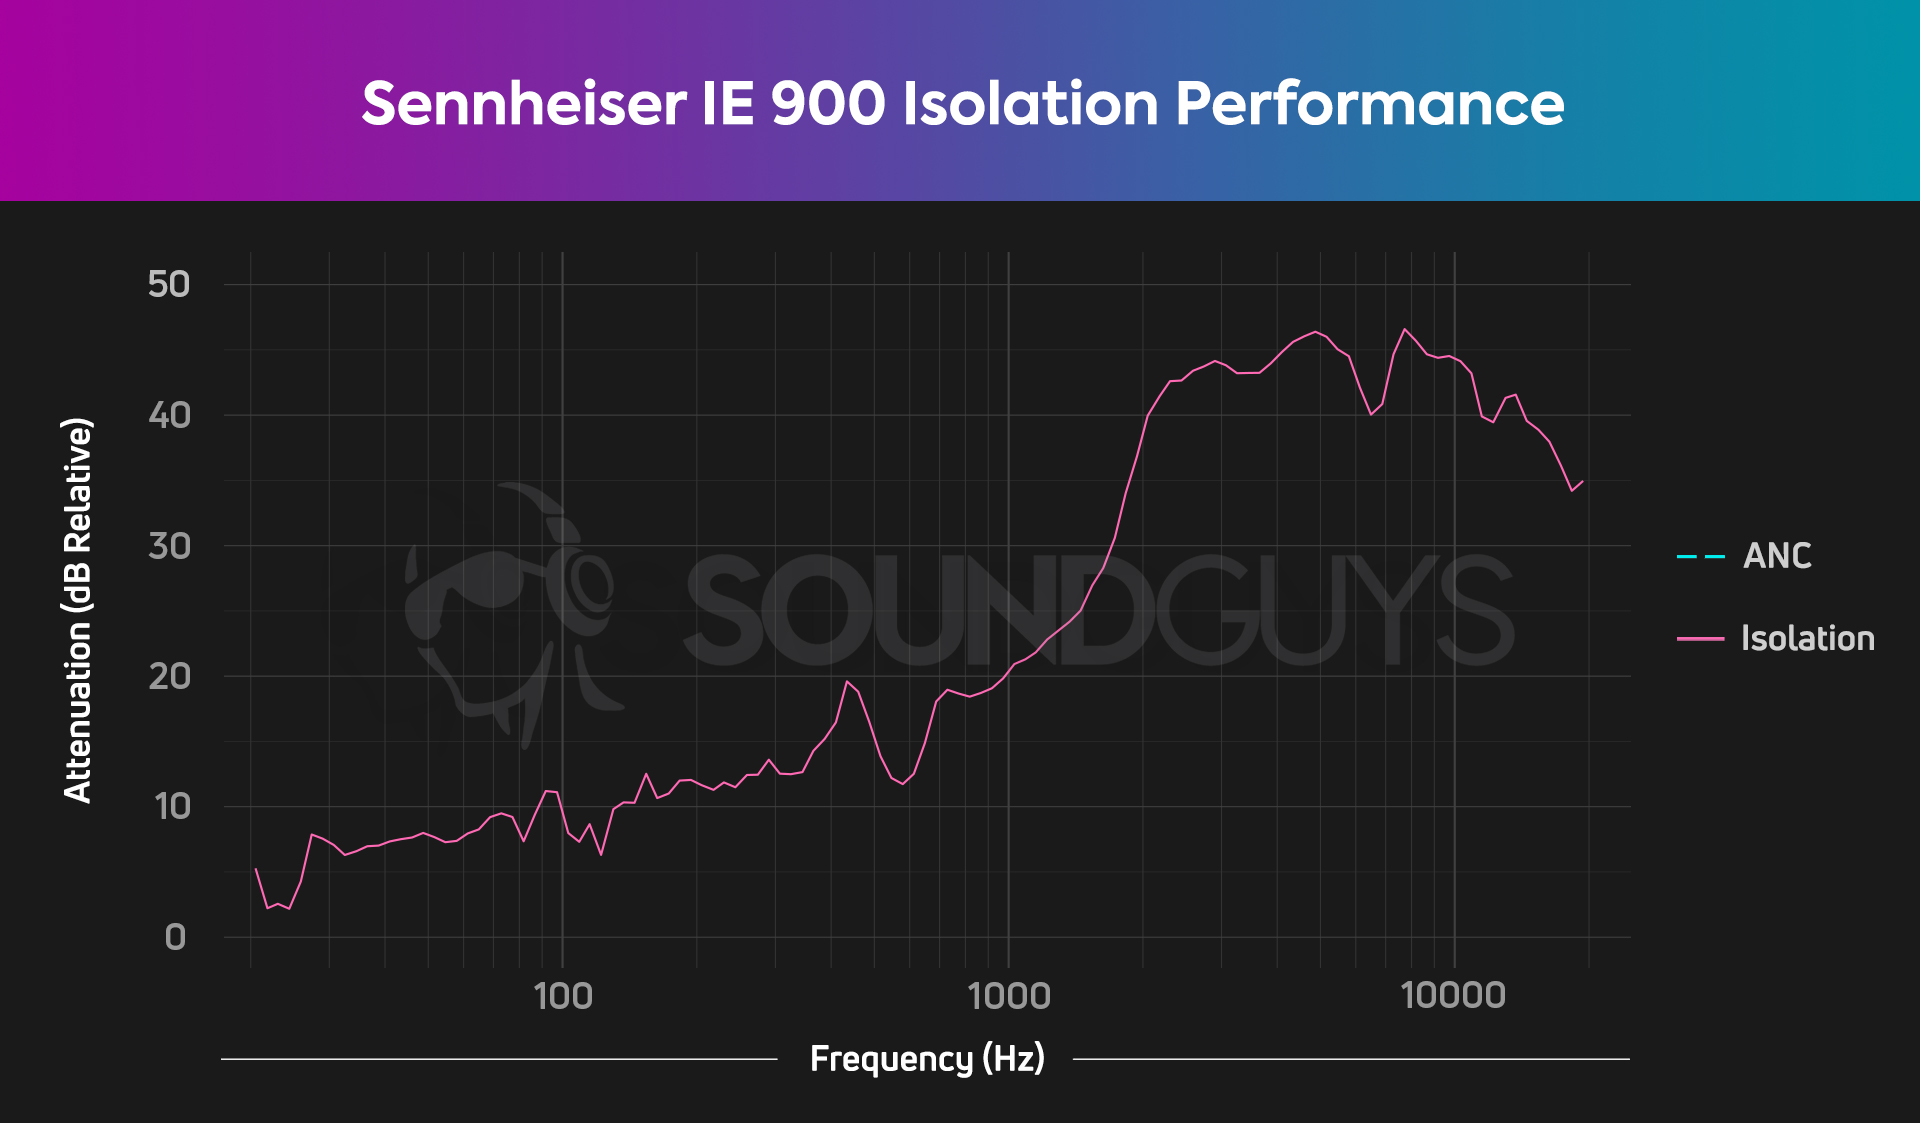 Image shows chart of Sennheiser IE 900 isolation attenuating between 10dB and about 45dB of noise.